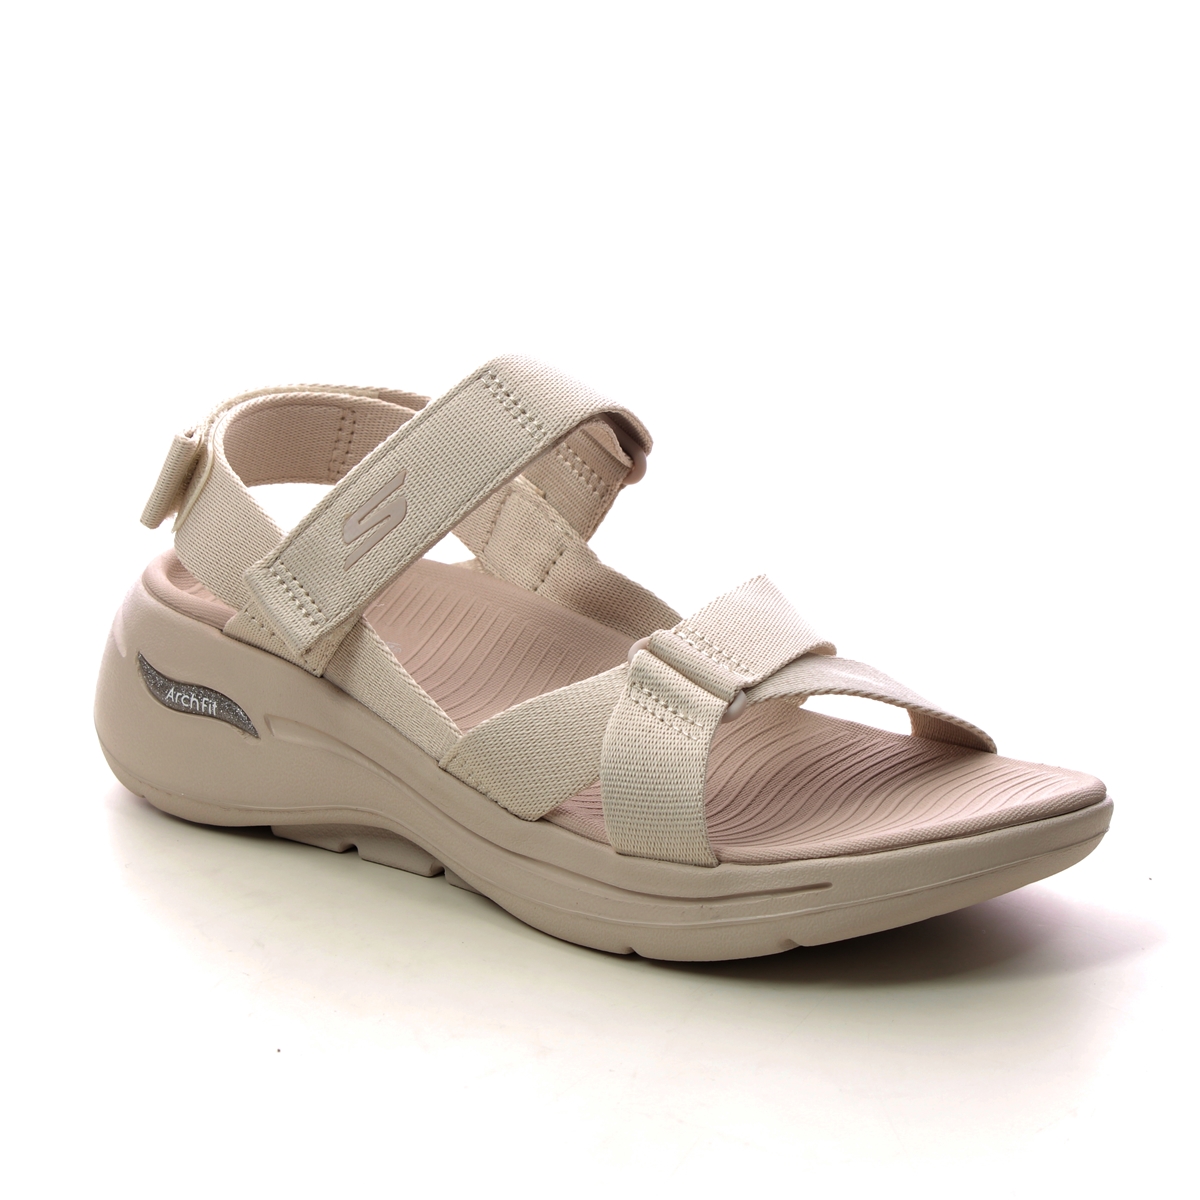 Skechers Arch Fit Attract NAT Natural Womens Comfortable Sandals 140808 in a Plain Textile in Size 8